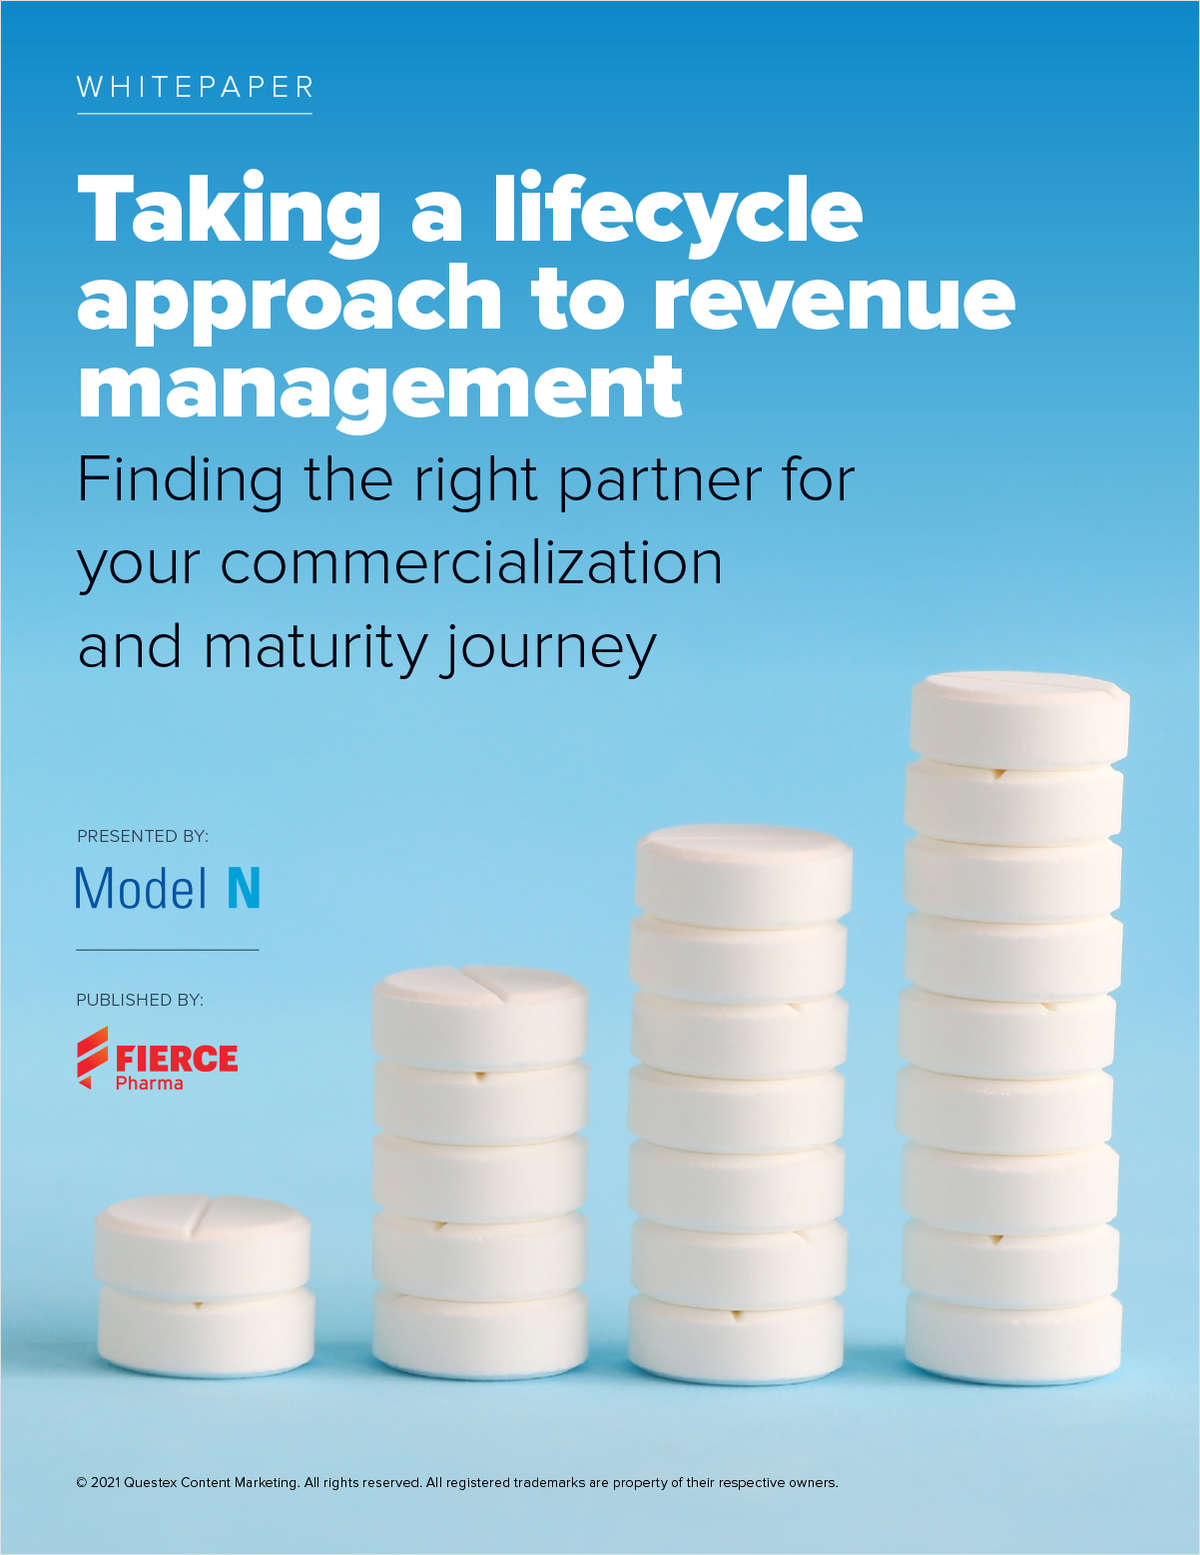 Taking a lifecycle approach to revenue management - Finding the right partner for your commercialization and maturity journey